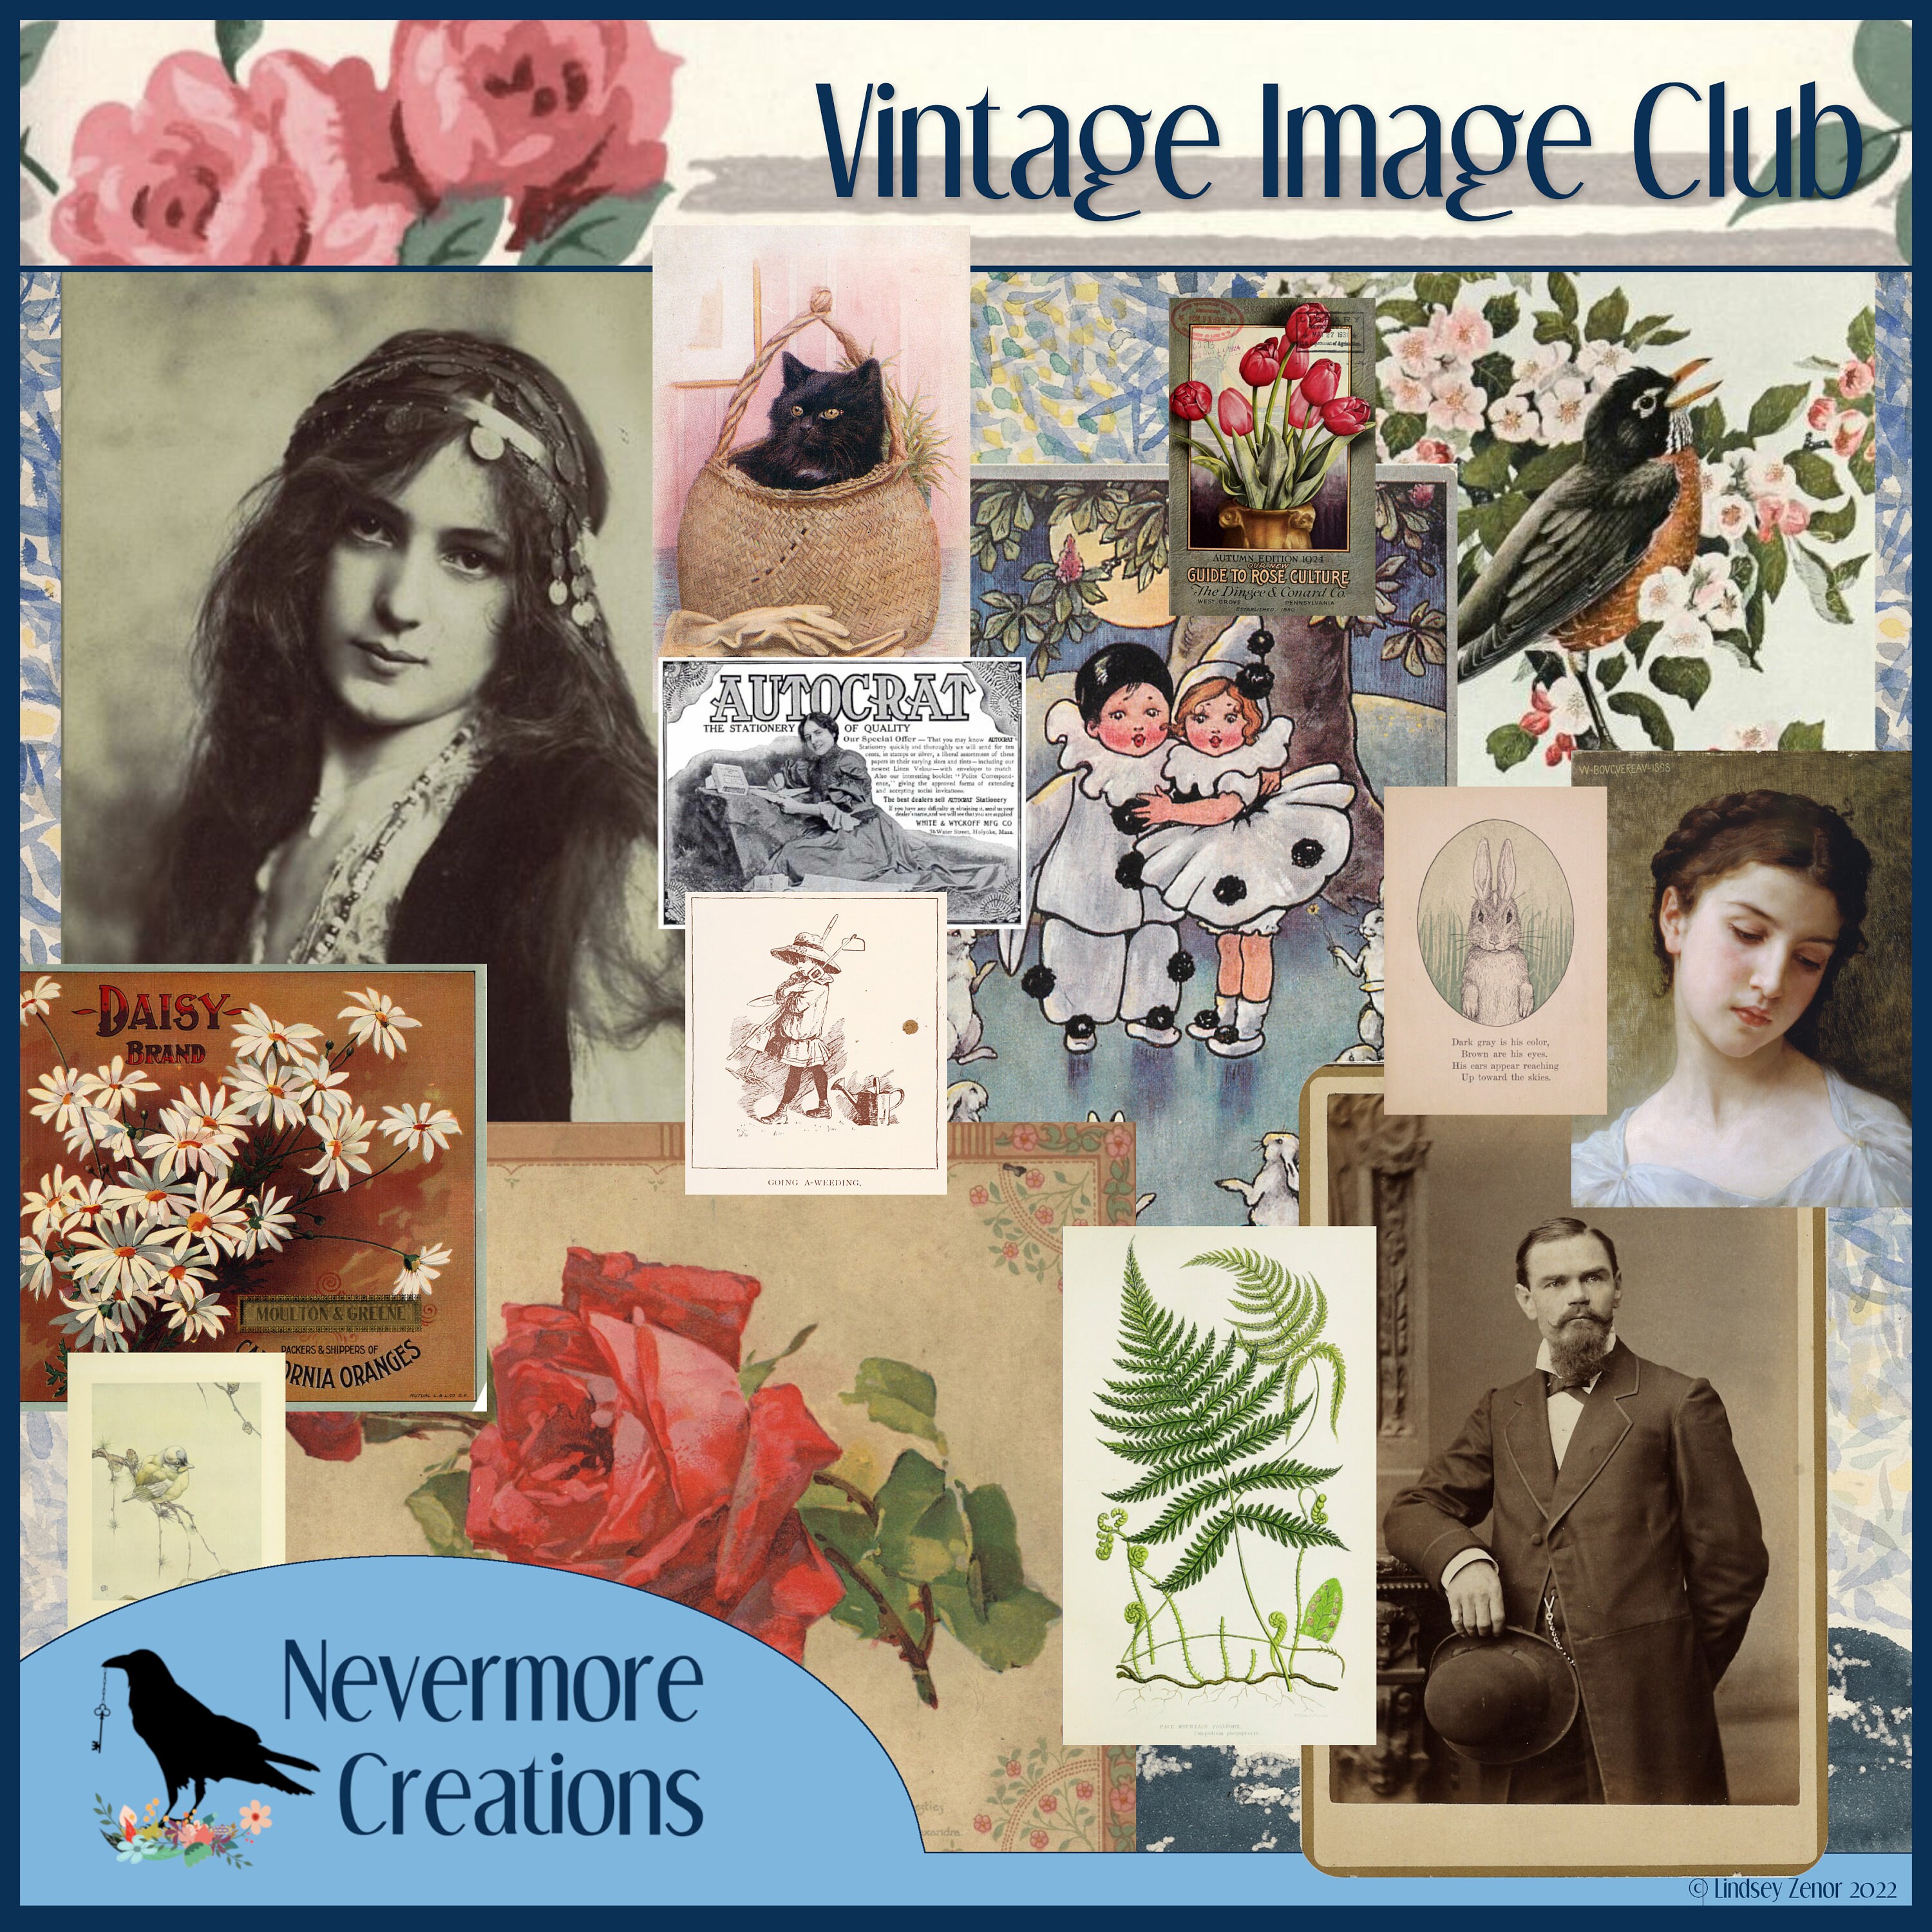  Collage And Cut Out Book: More than 400 high quality images:  Insects, dogs, cats, vintage, ephemera, Botanicals, Birds, Vehicles, etc.  Mixed Media,  Crafts, and More (Cut and Collage Books): Books